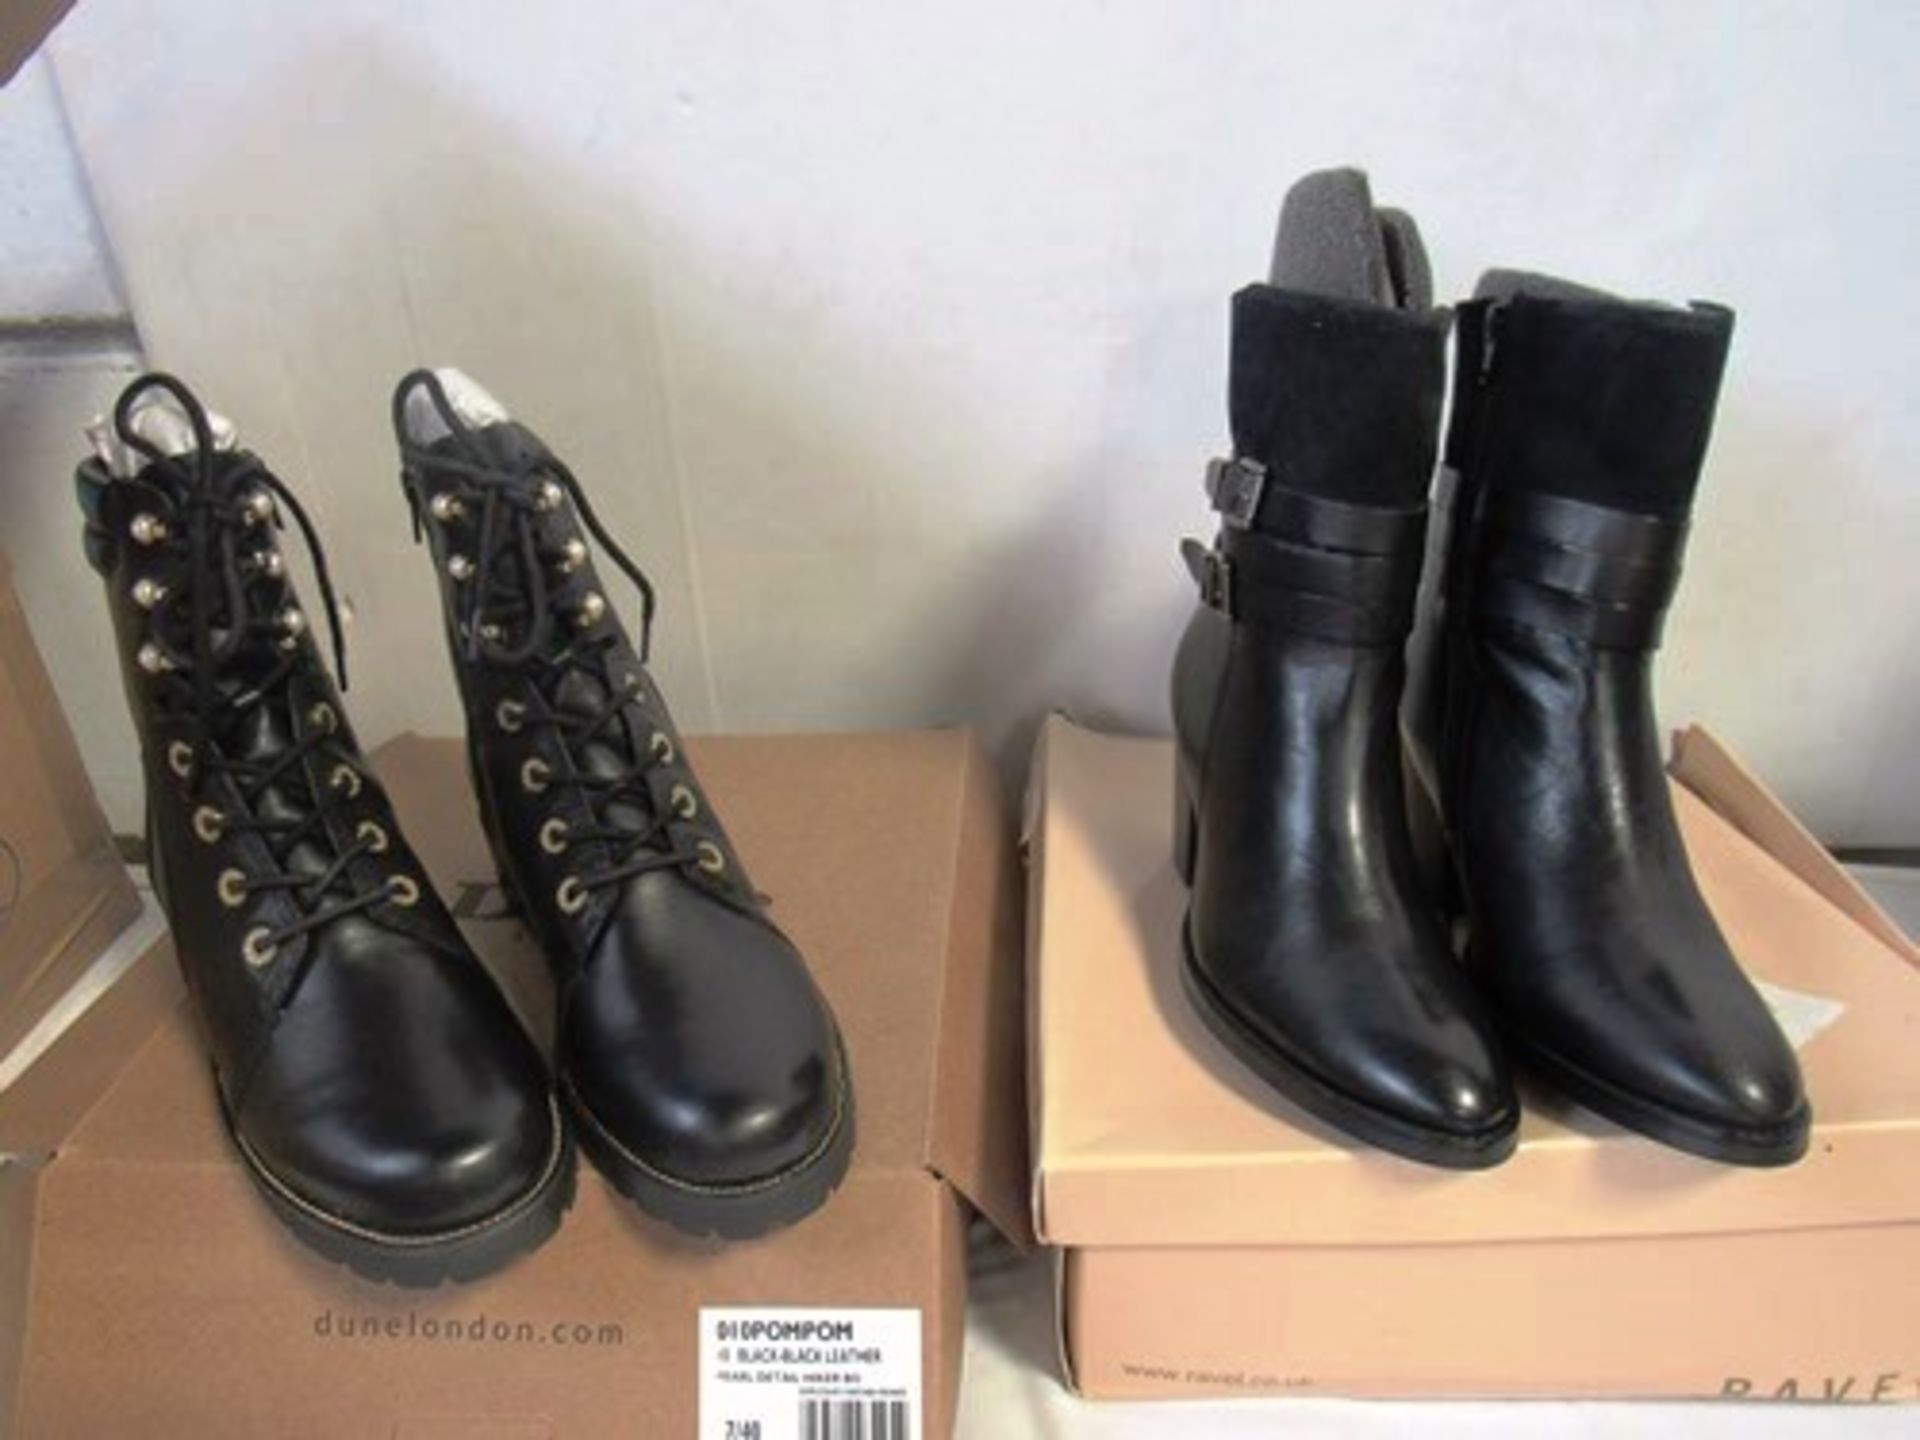 1 x pair of Dune hiker boots, size 7 and 1 x pair of Ravel boots, size 6 - New in box (ES13C)